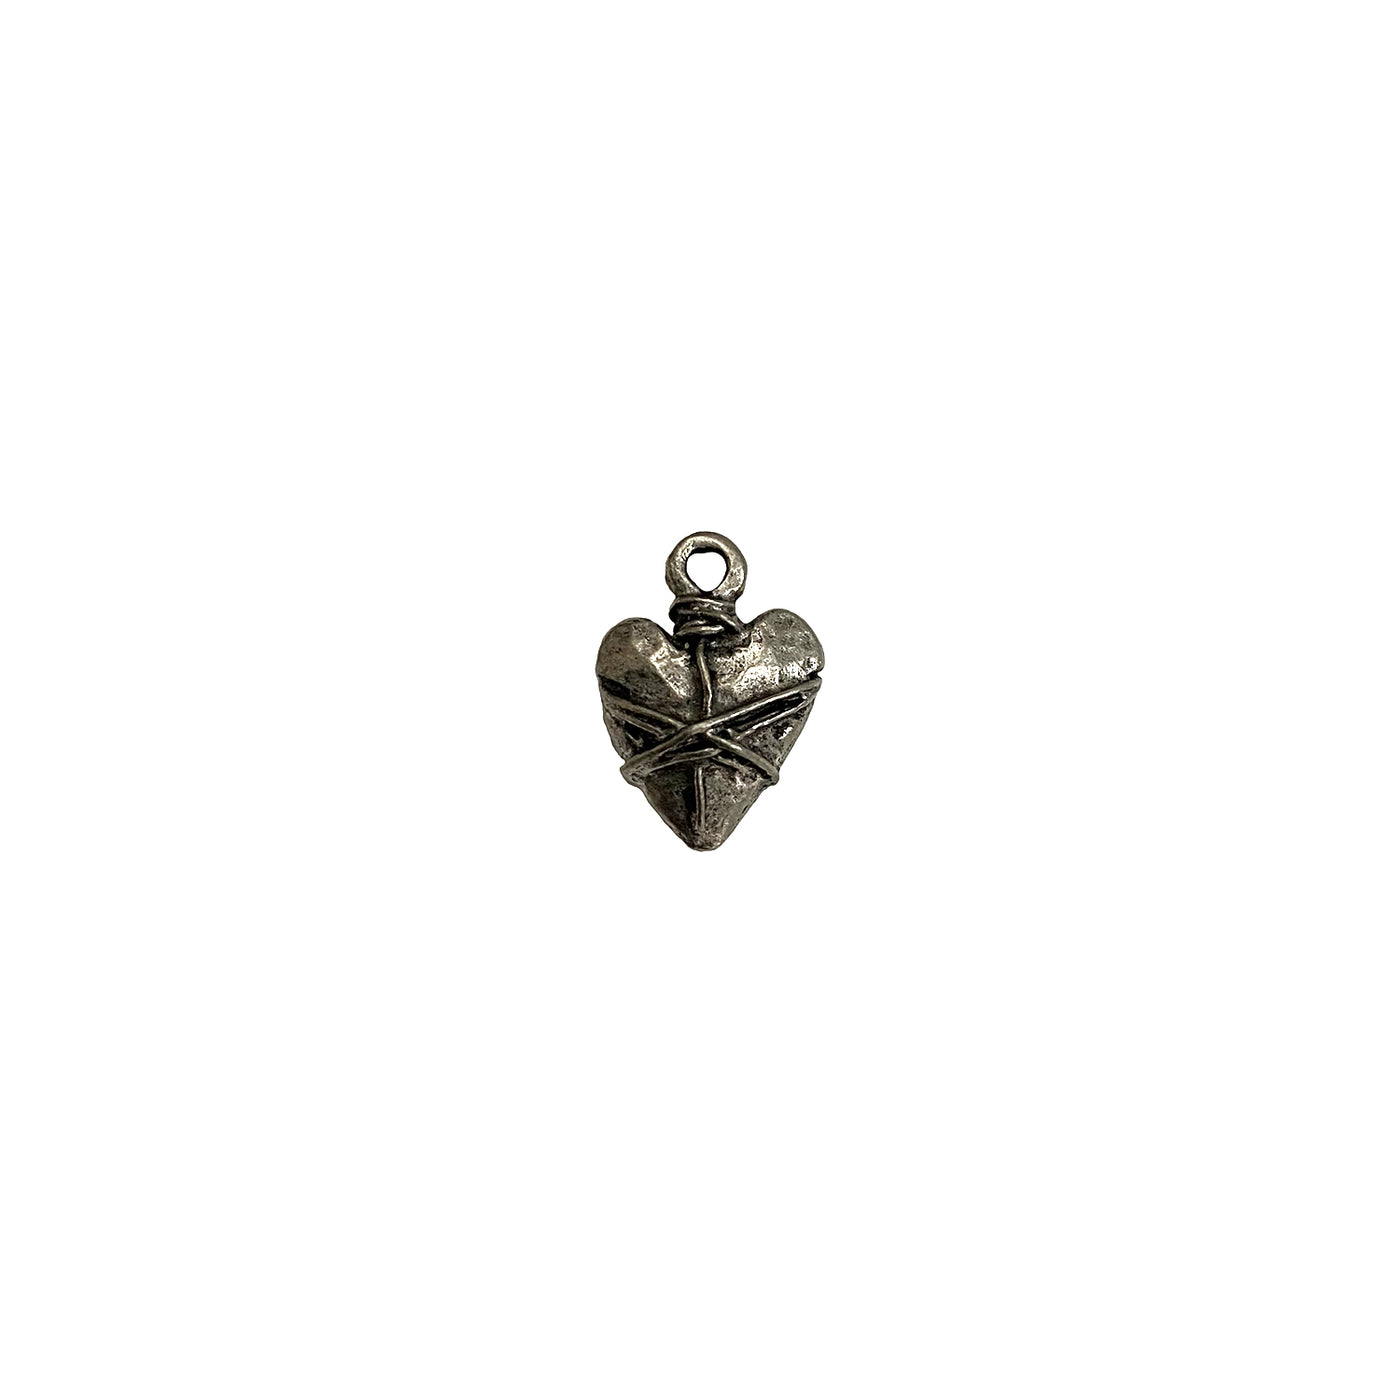 Antique Pewter Wrapped Heart